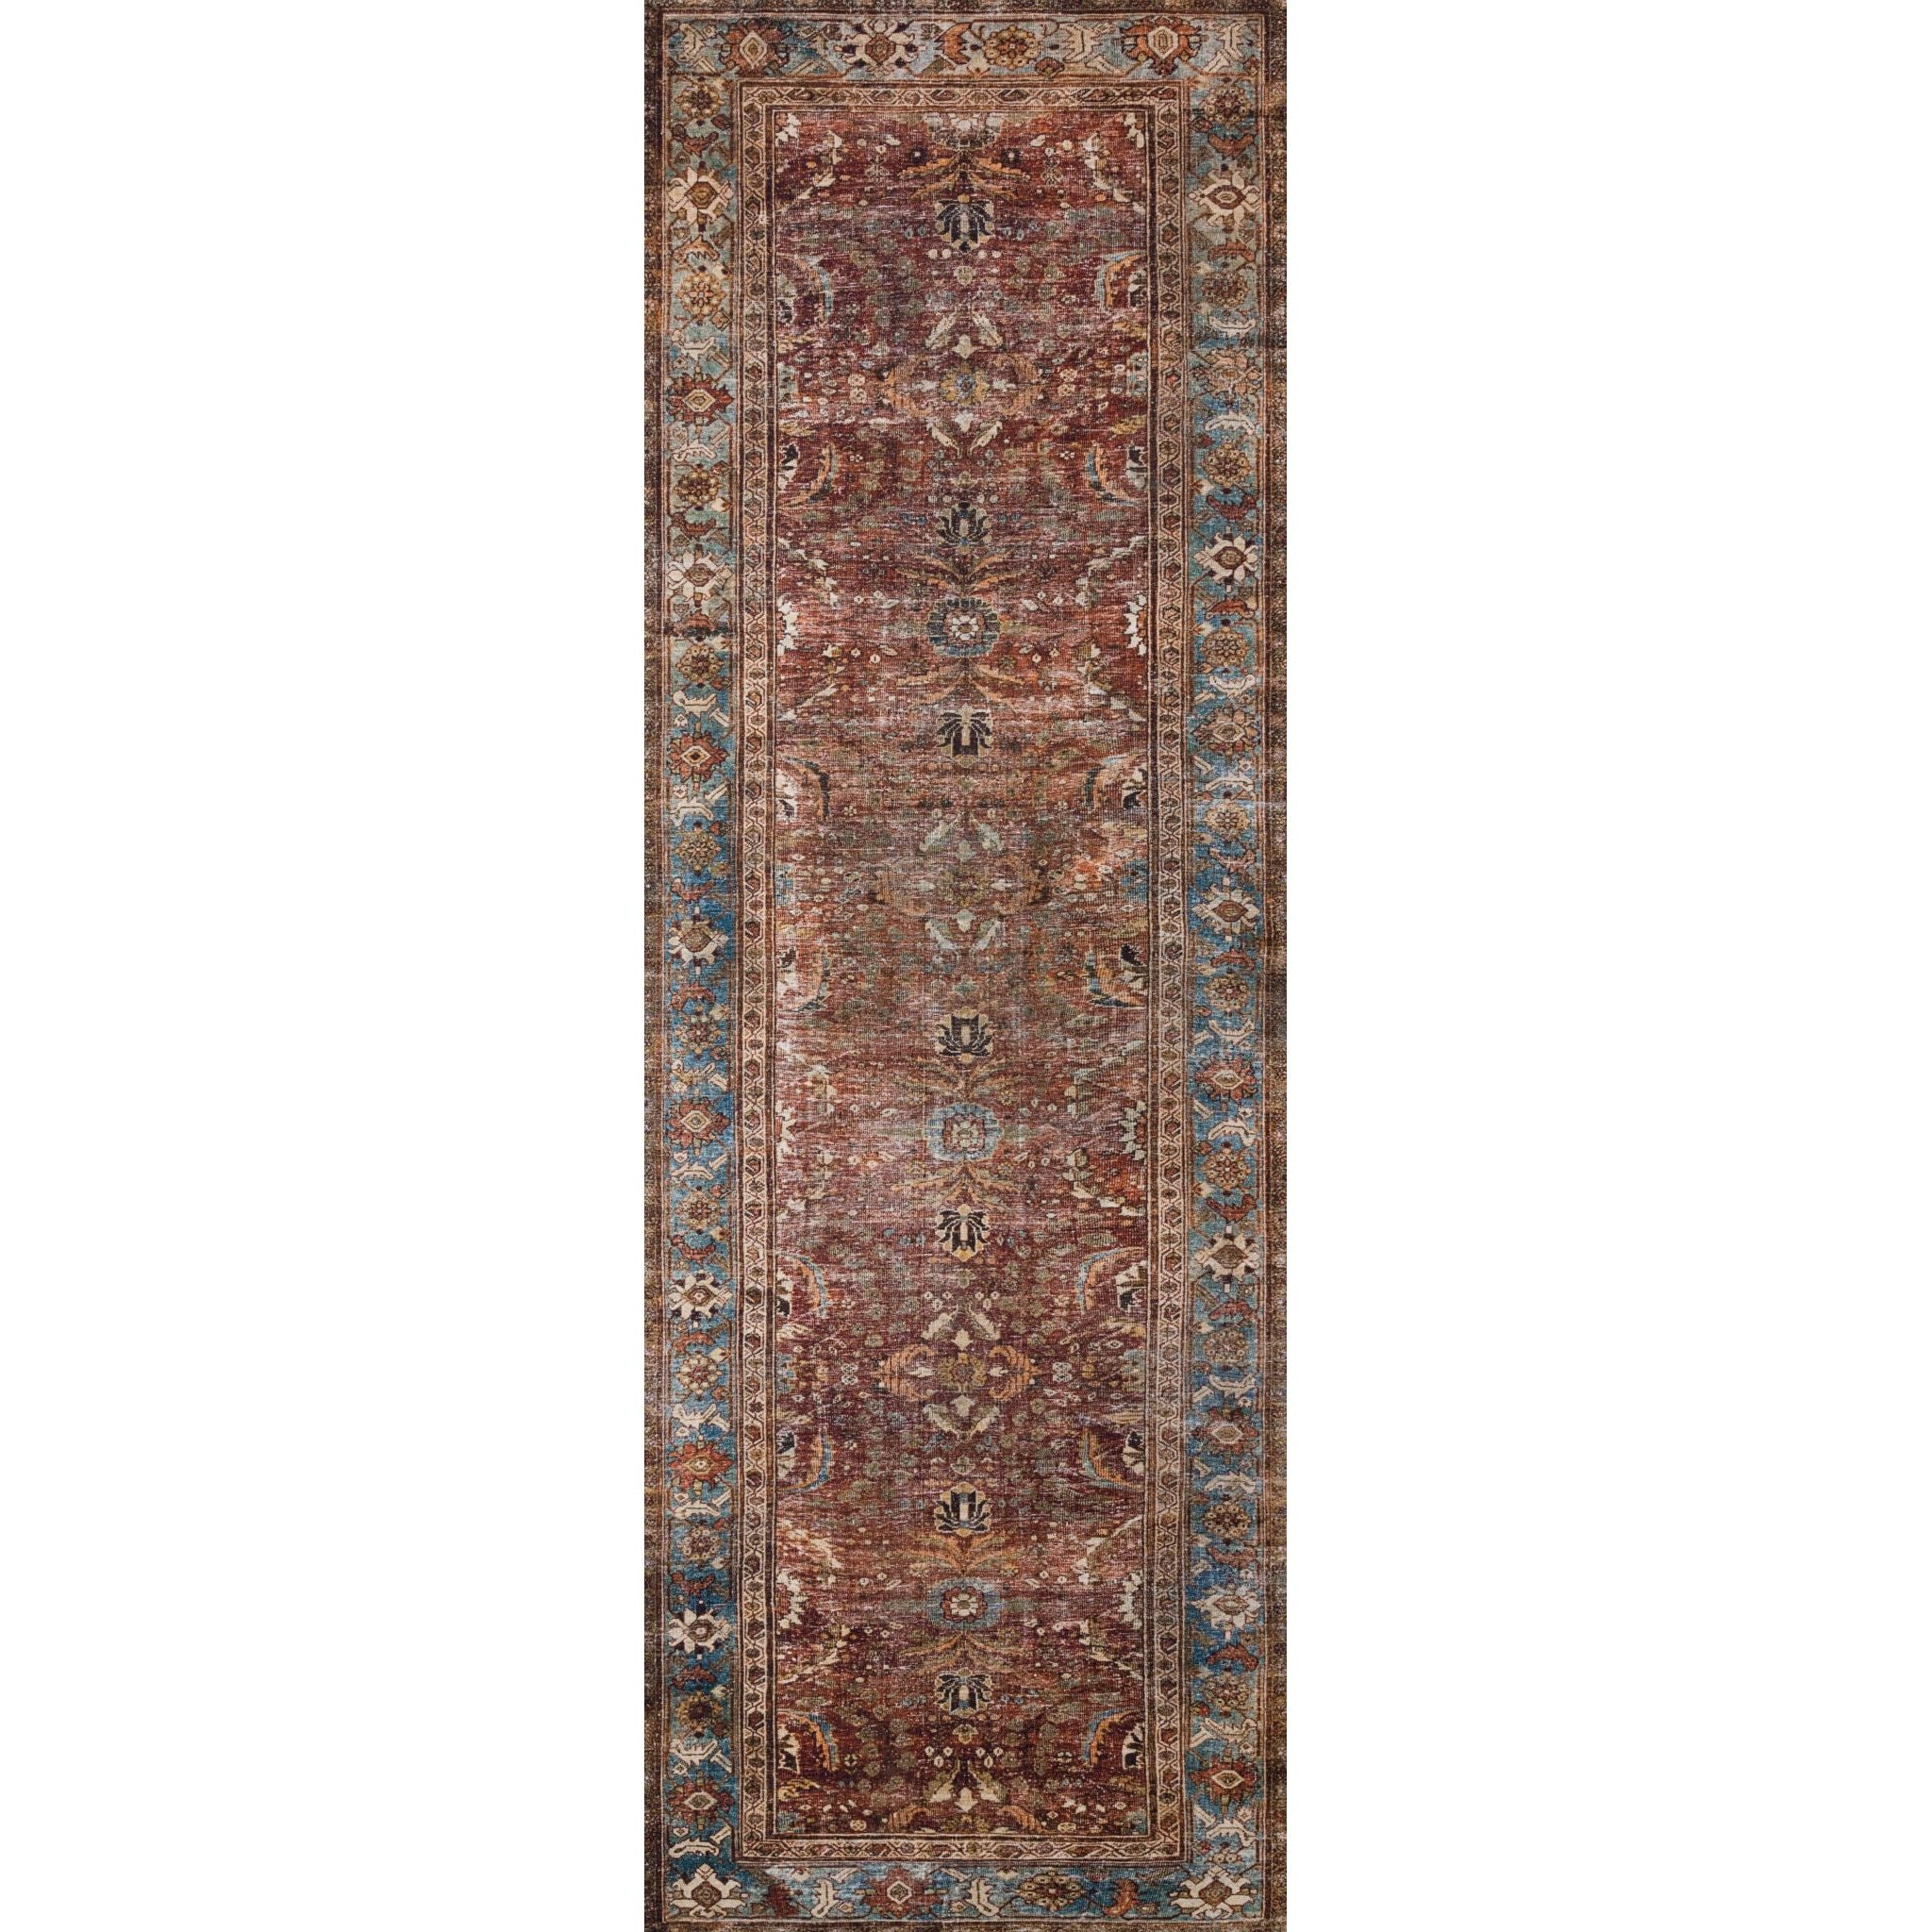 Layla Brick/Blue Rug - Amethyst Home The Layla Collection is traditional and timeless, with a beautiful lived-in design that captures the spirit of an old-world rug. This traditional power-loomed rug is crafted of 100% polyester with a classic and sophisticated color palette and subtle patina.